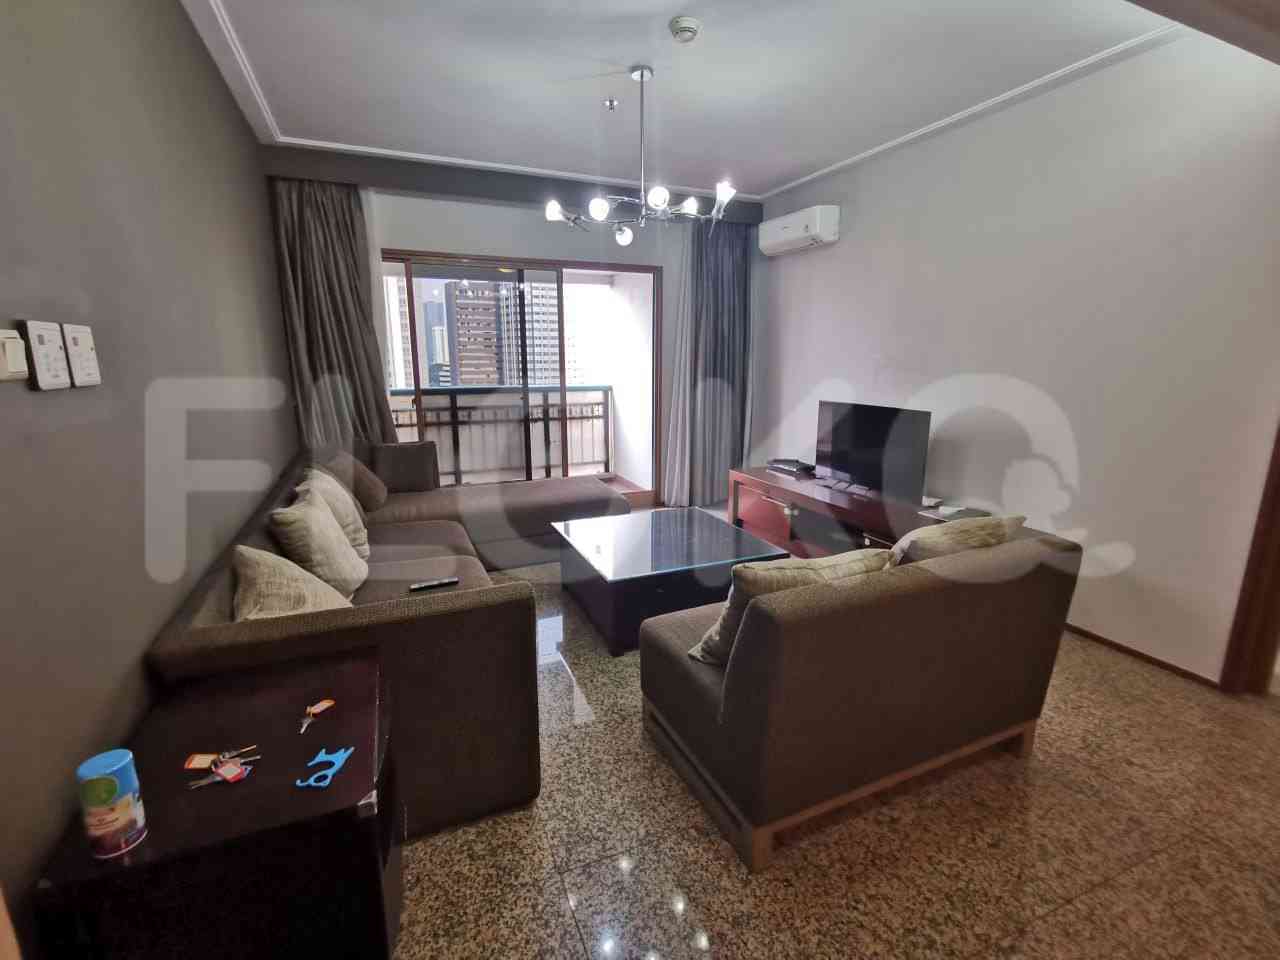 2 Bedroom on 16th Floor for Rent in Pavilion Apartment - fta272 3